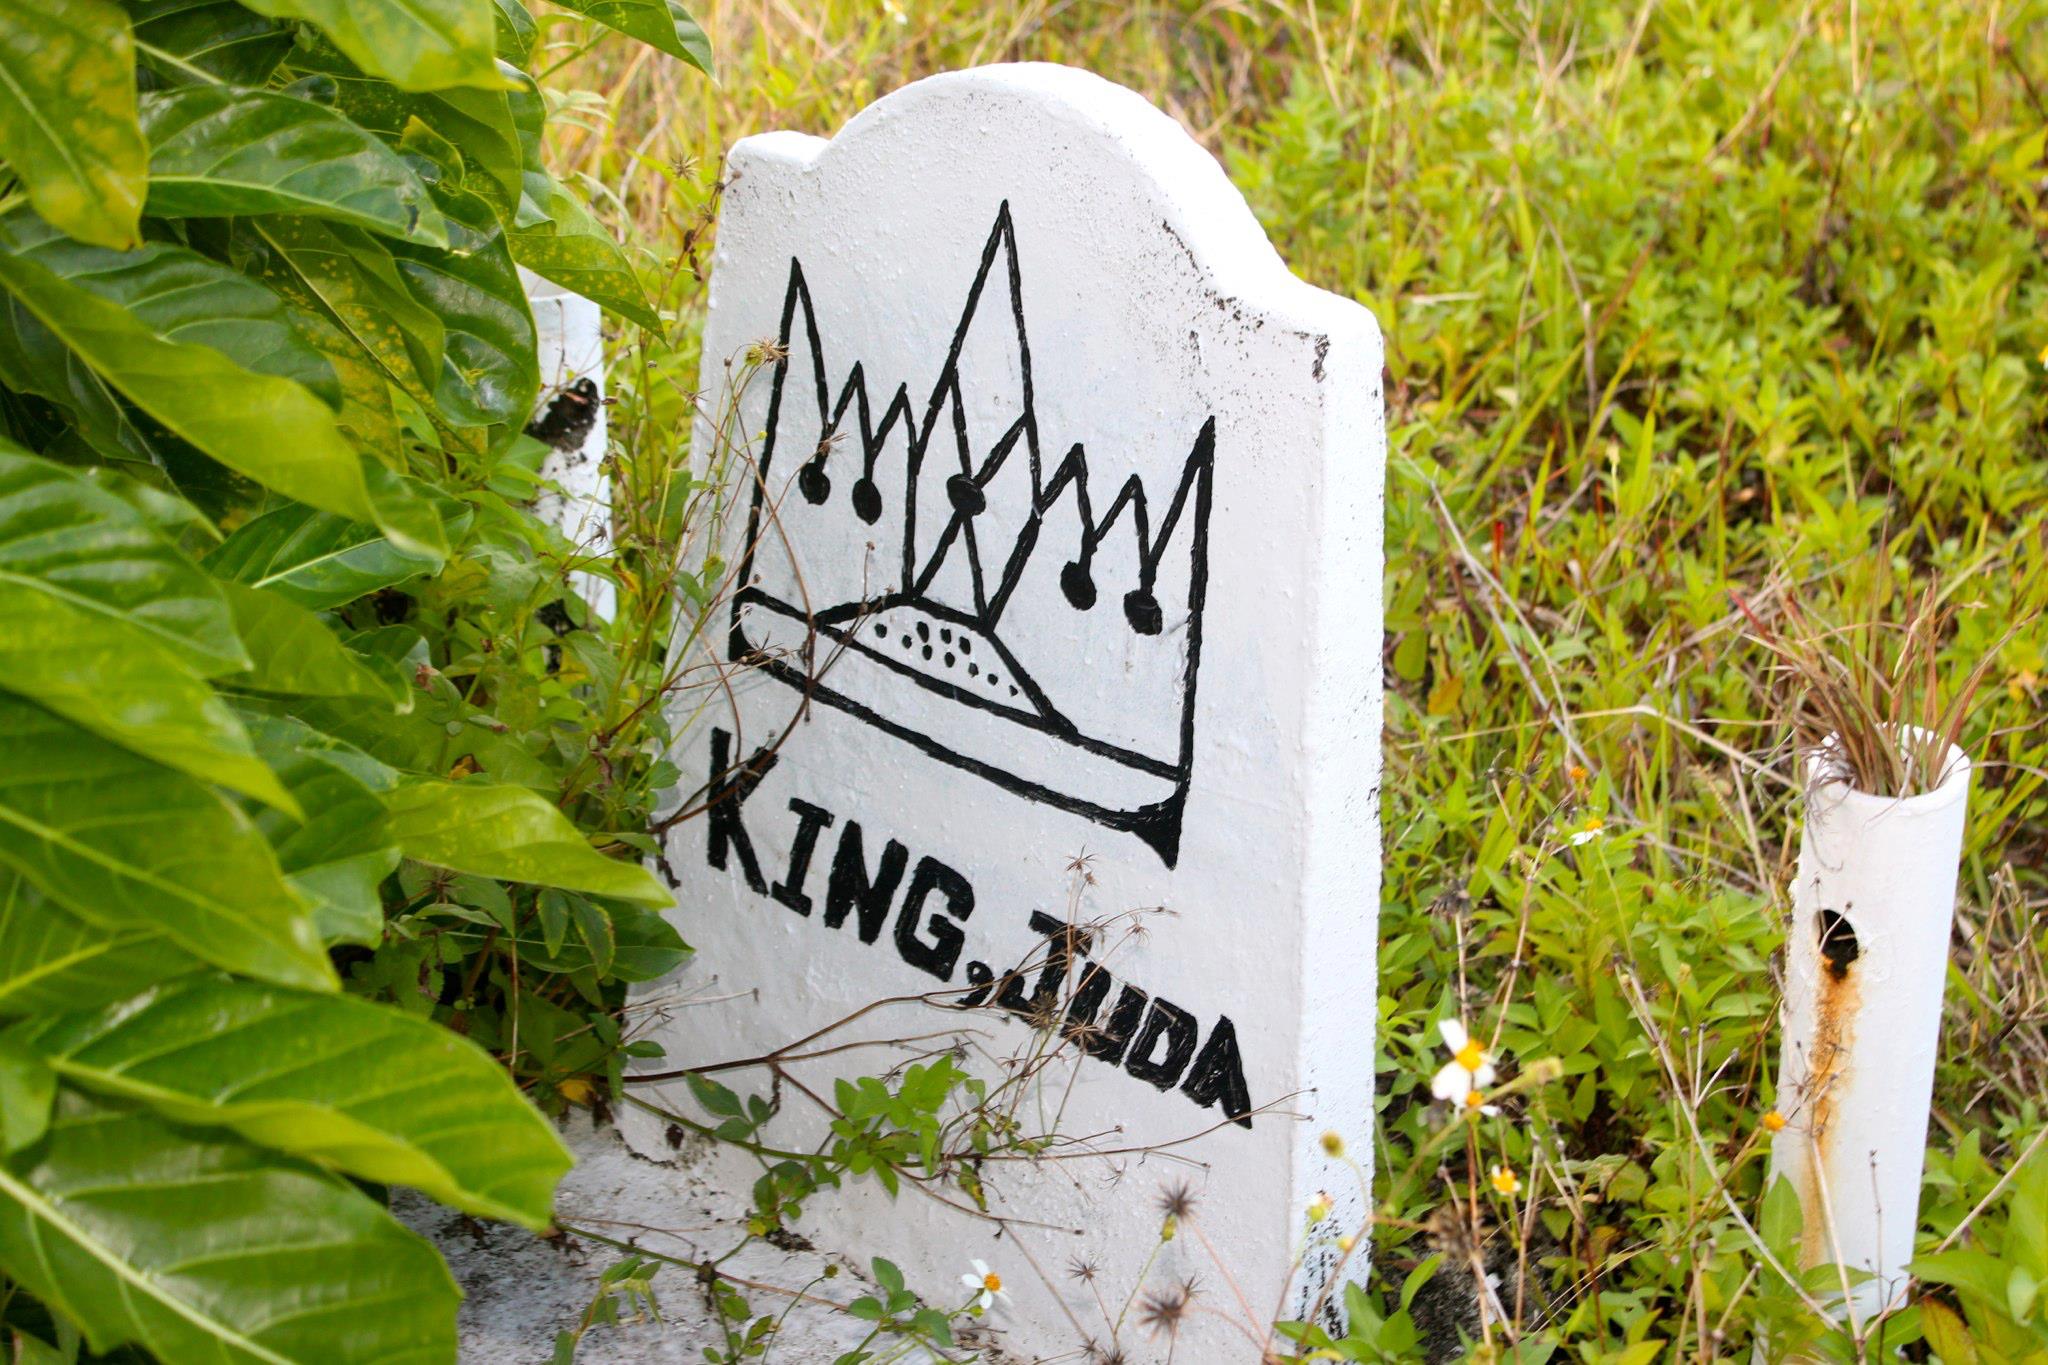 A white gravestone with the words "King Juda" and a drawing of a crown.